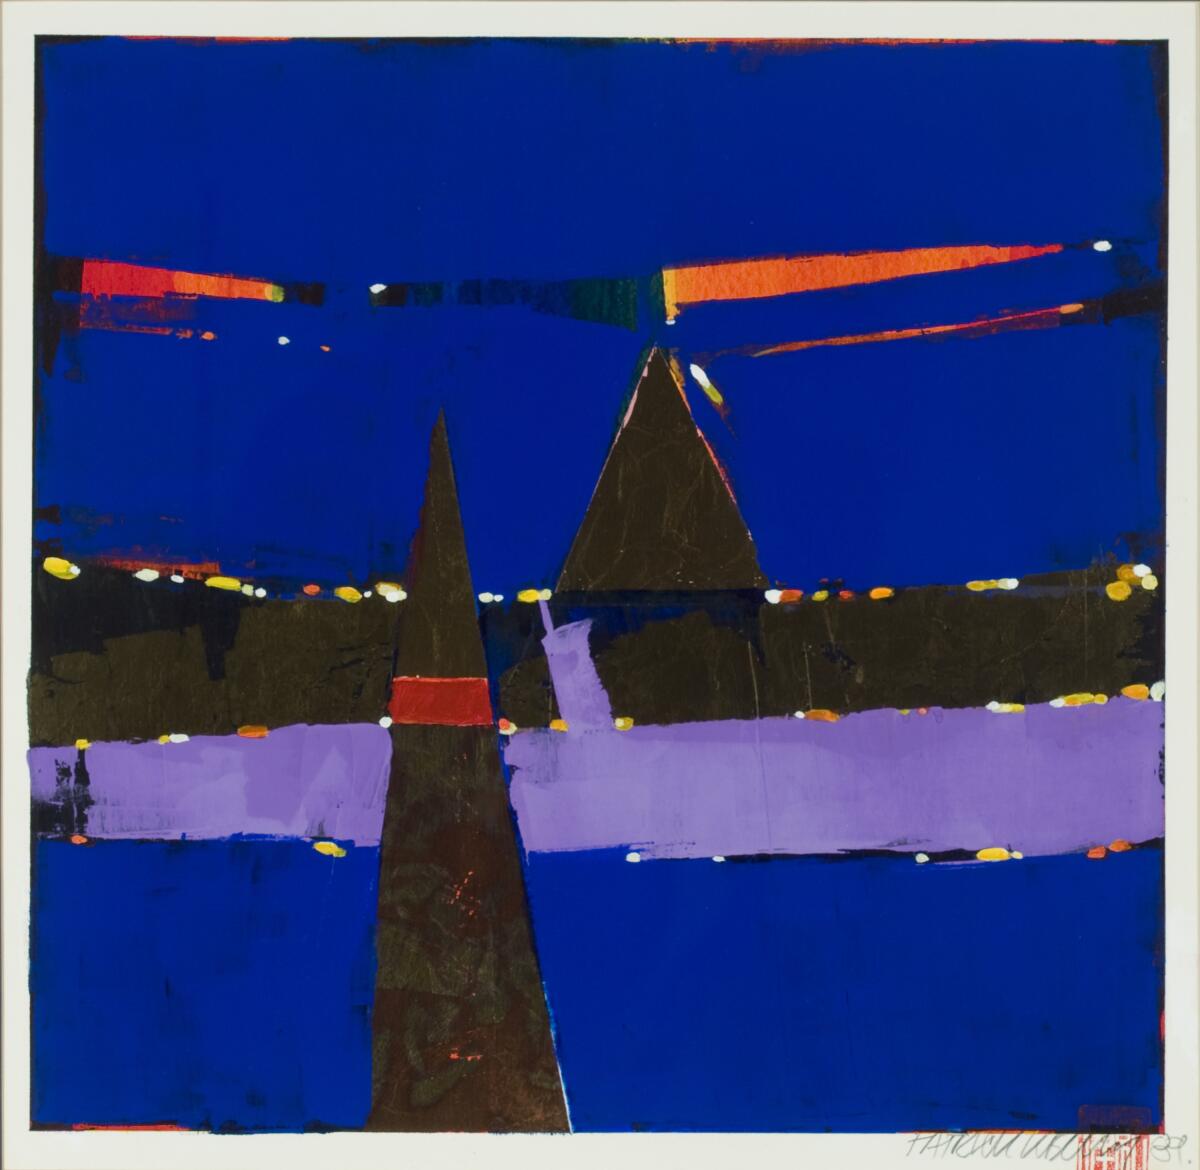 Patrick Kelly's painting "Series II," which is in the Festival of Arts' permanent collection.